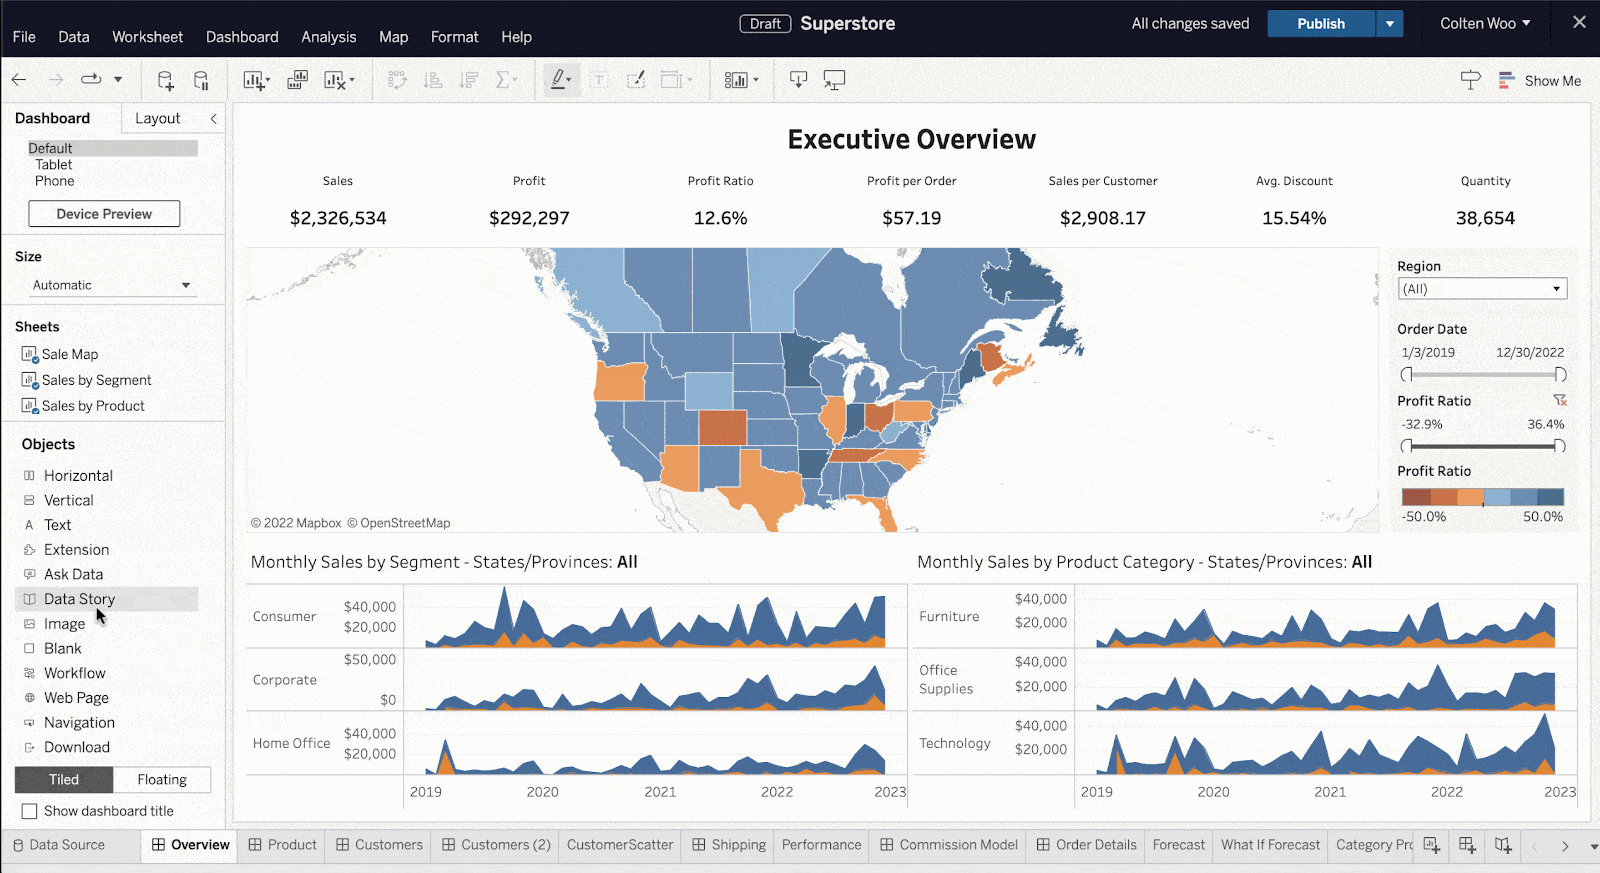 GIF of Data Stories in the Tableau interface